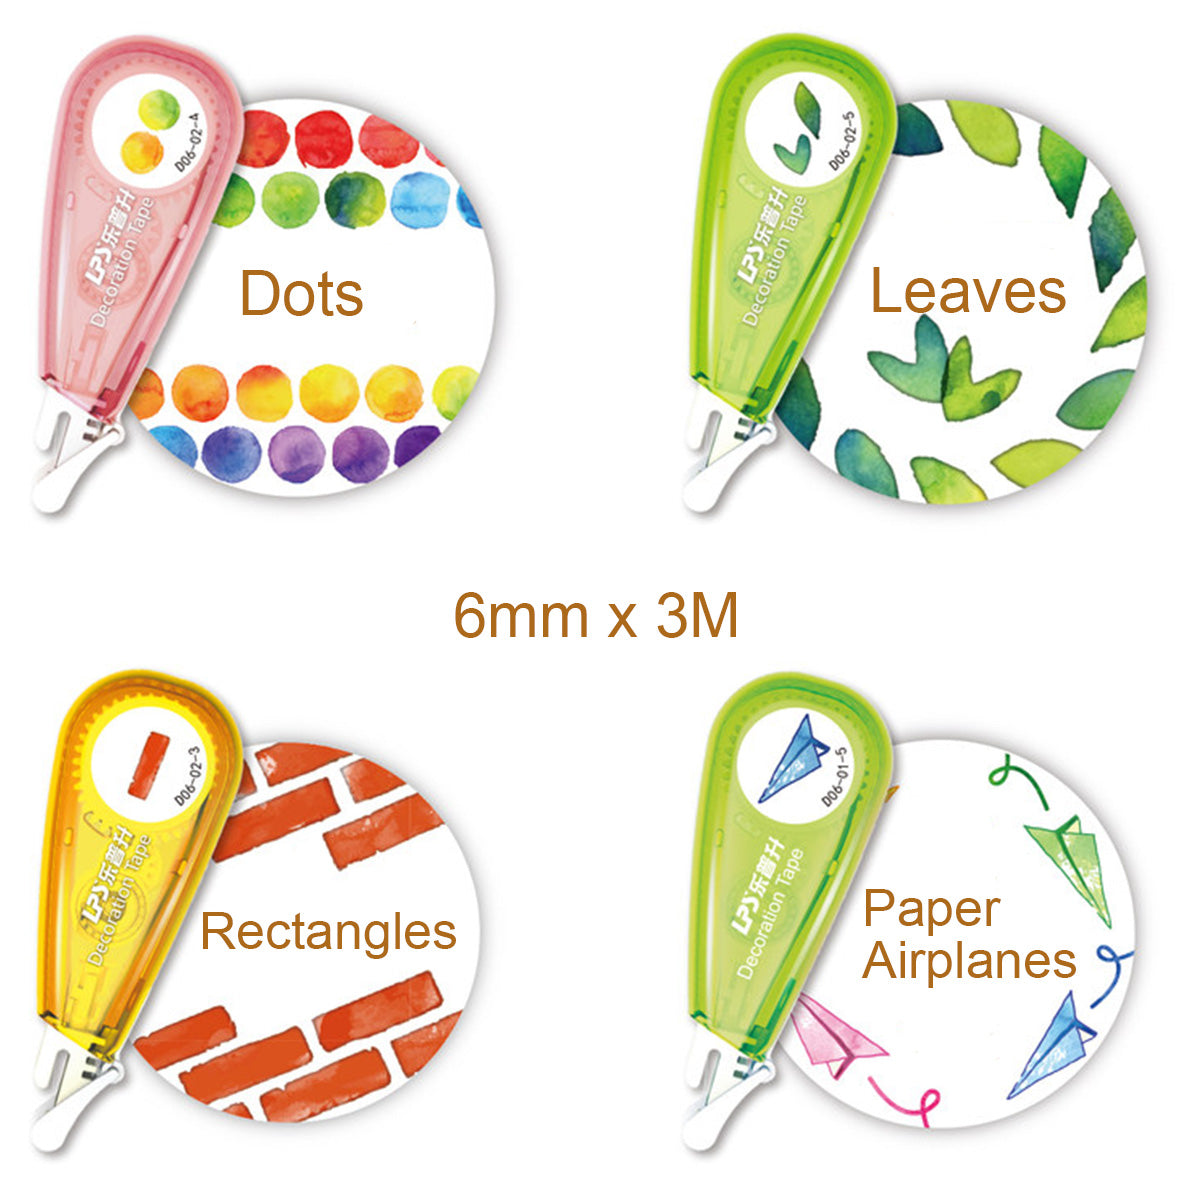 Wrapables Novelty Sticker Machine Pens, Decorative Stationery Supplies for Home Office School